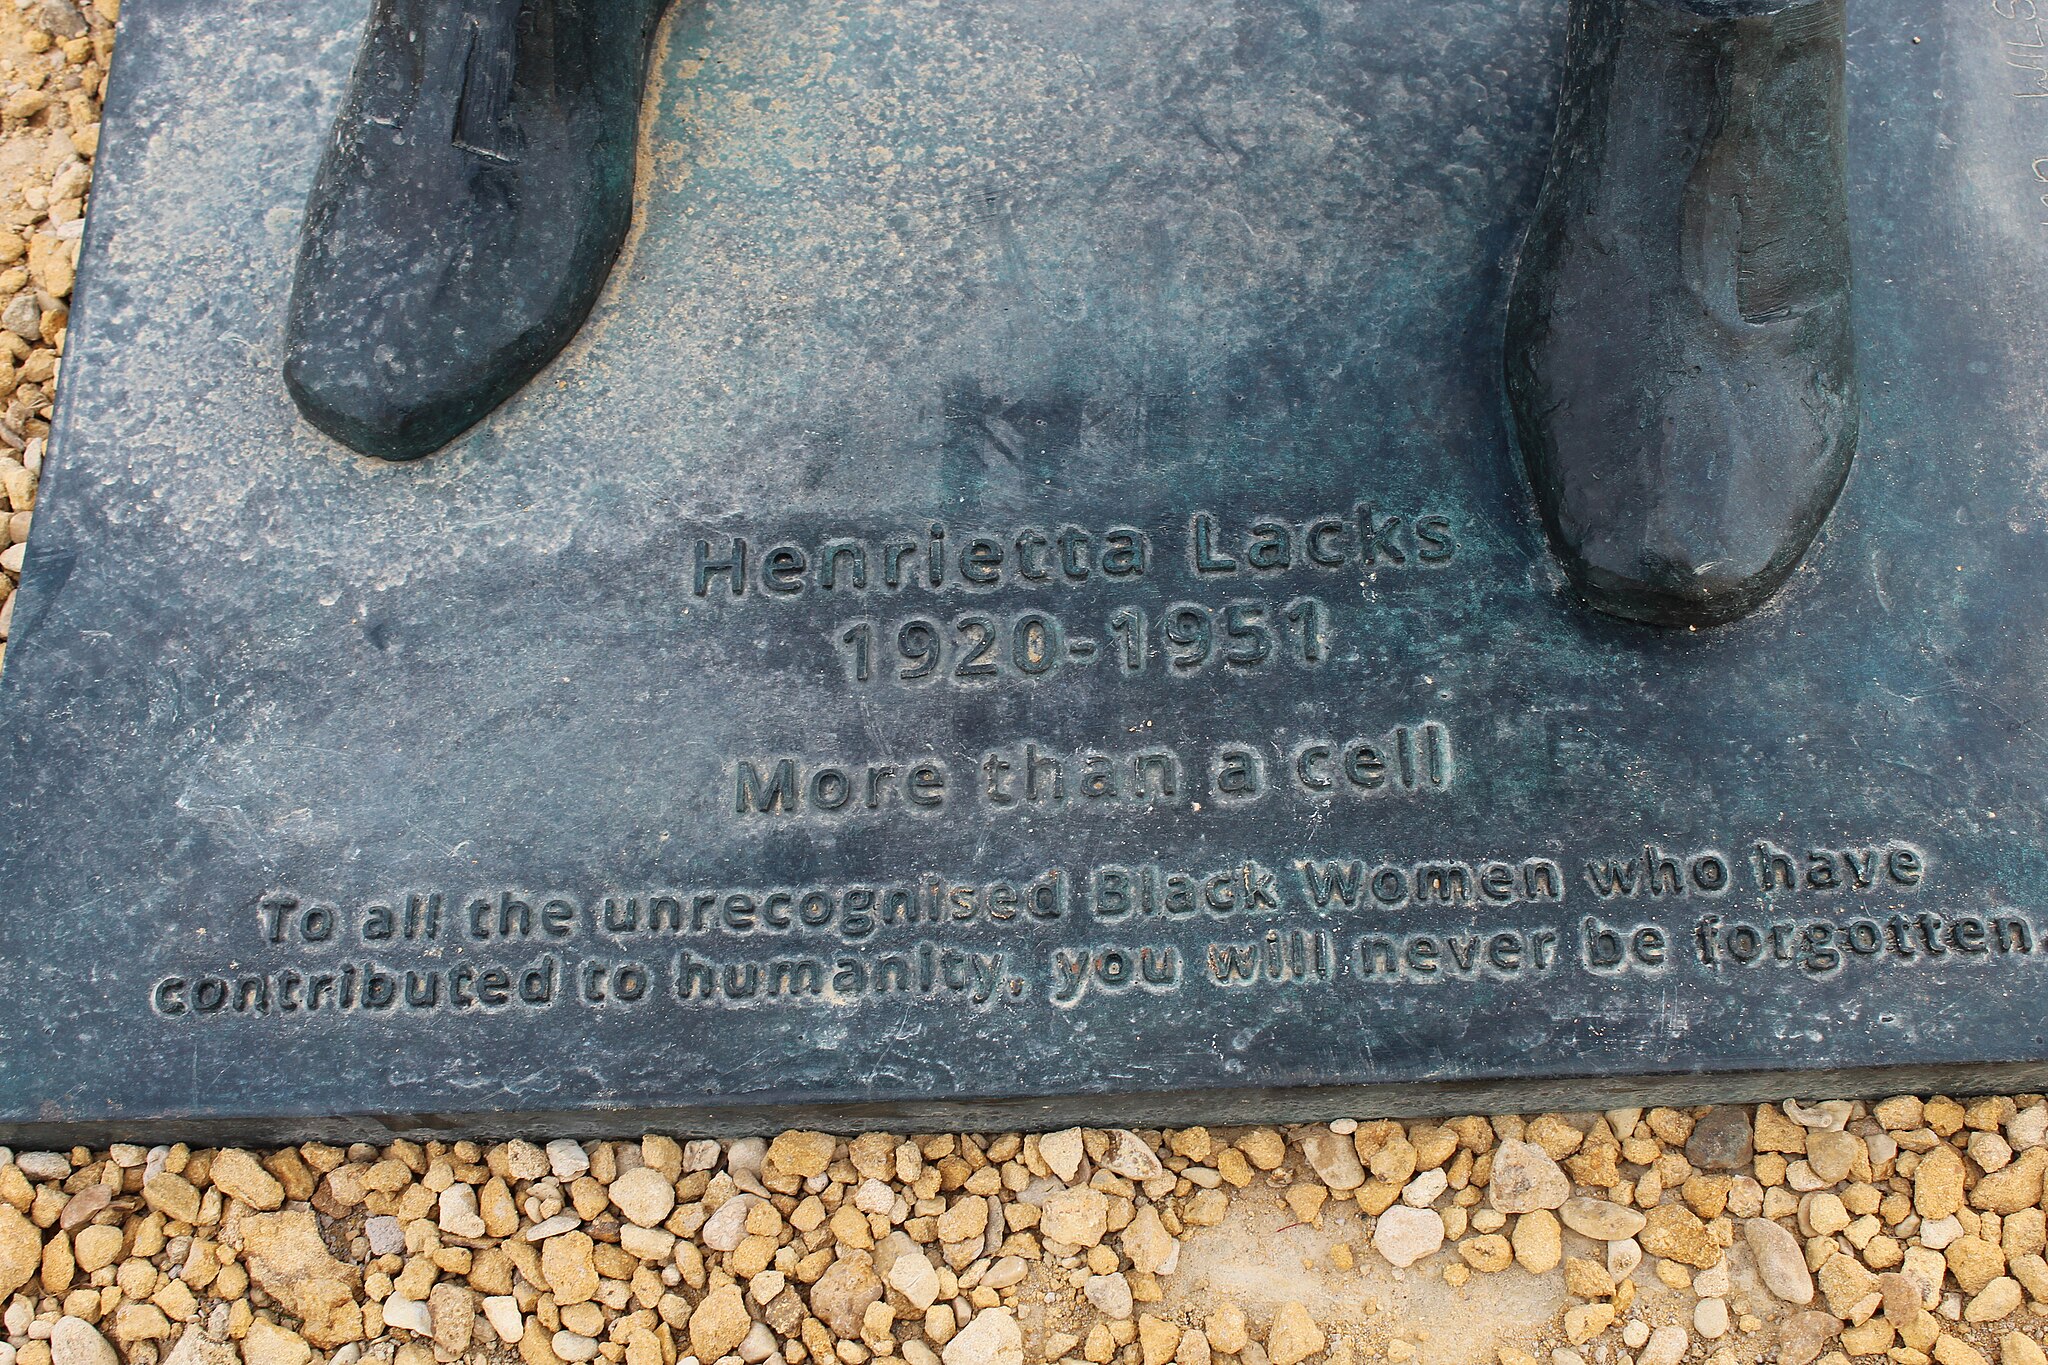 English: Bronze statue of Henrietta Lacks by sculptor Helen Wilson-Roe located at Royal Fort House, Bristol. The plaque at the foot of the statue reads: Henrietta Lacks 1920-1951. more than a cell. To all the unrecognized Black Women who have contributed to humanity, you will never be forgotten.